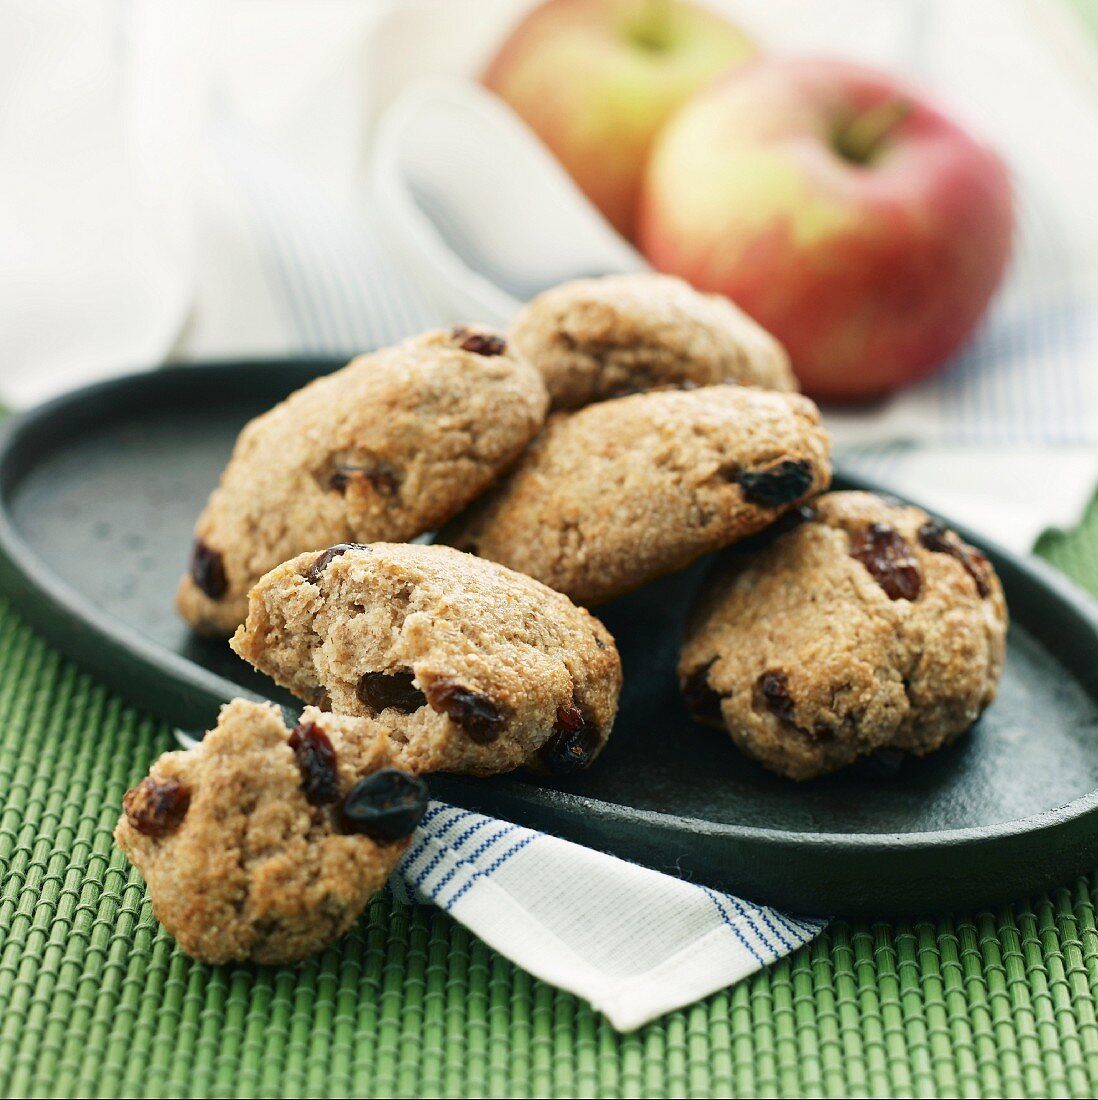 Wholemeal biscuits with apple